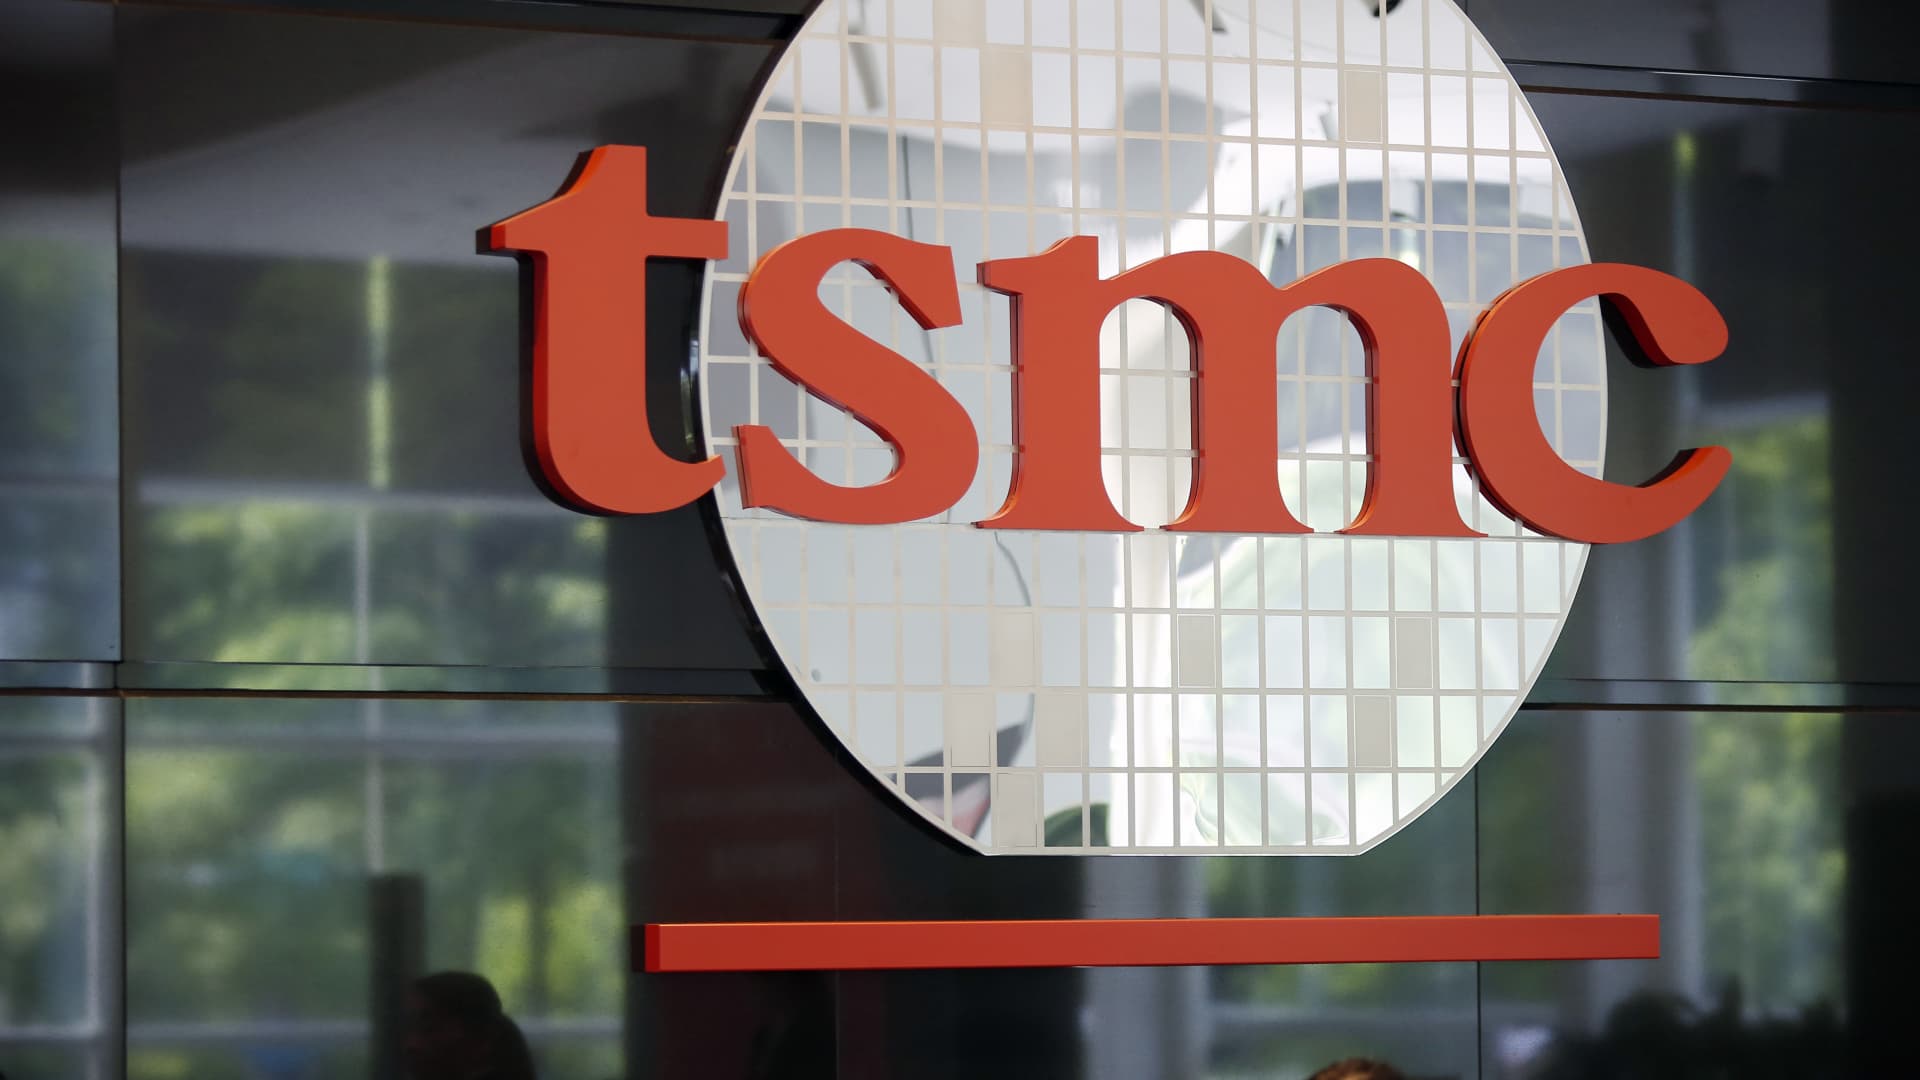 World’s largest chipmaker TSMC posts record profit allaying fears over semiconductor headwinds